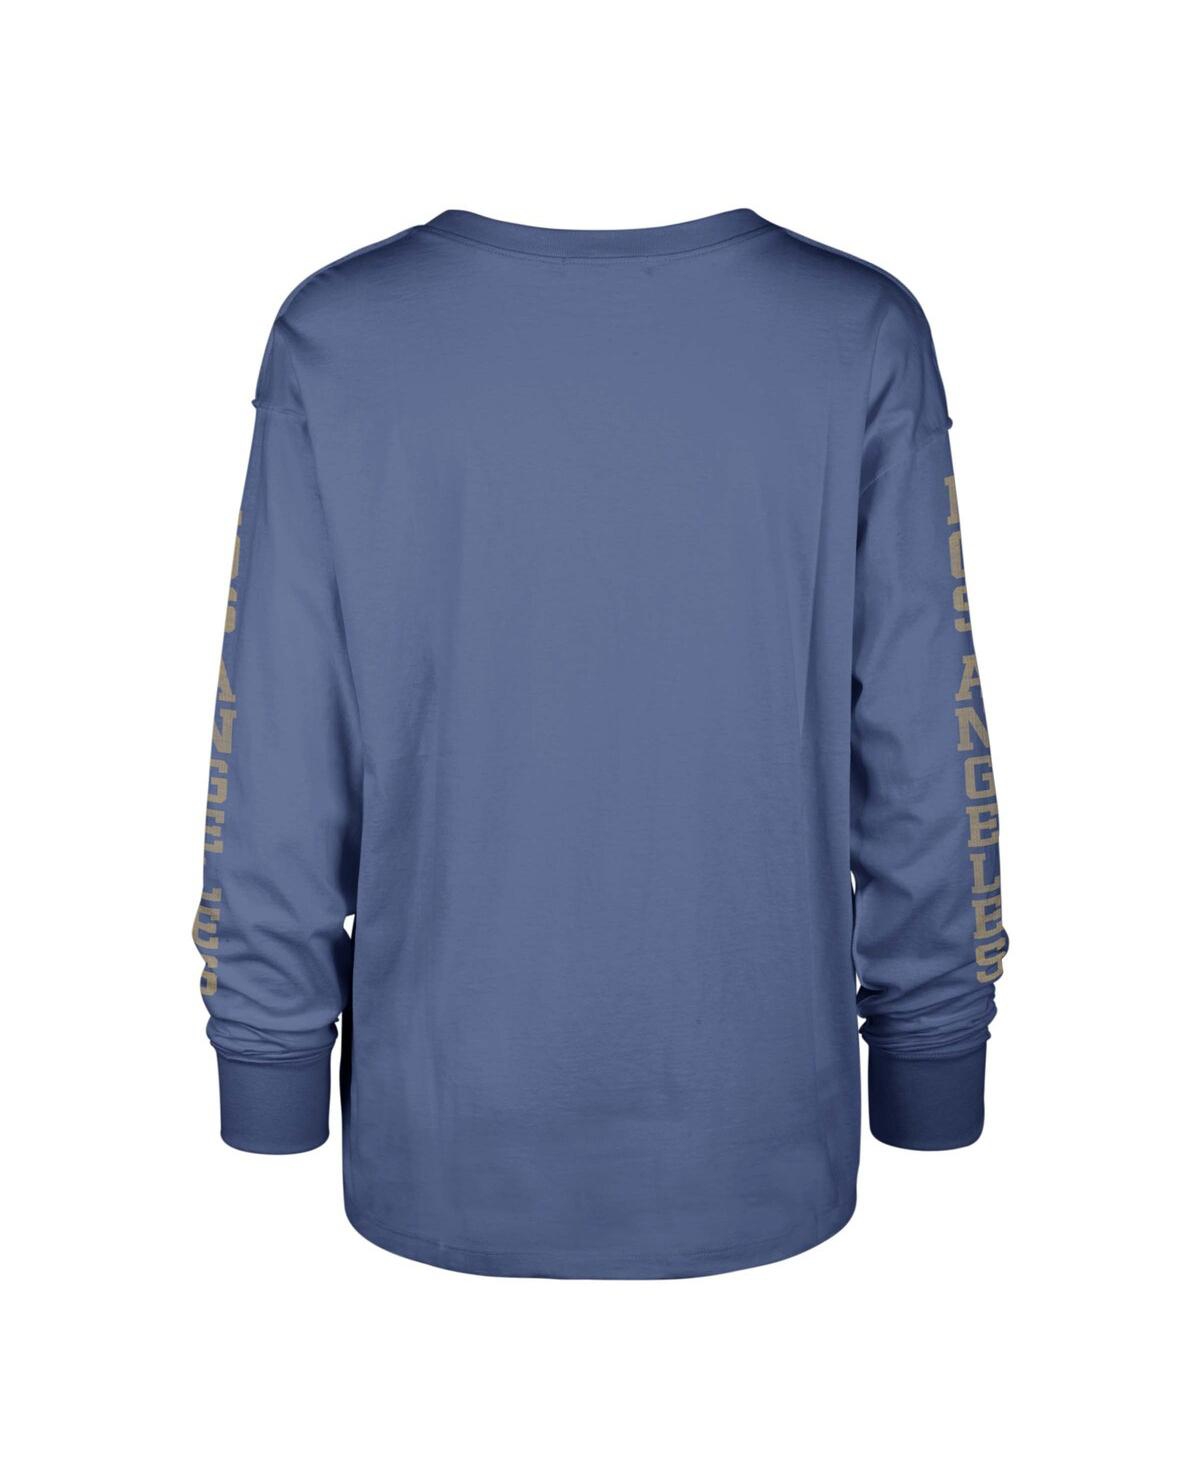 Shop 47 Brand Women's ' Powder Blue Distressed Los Angeles Chargers Tom Cat Lightweight Long Sleeve T-shir